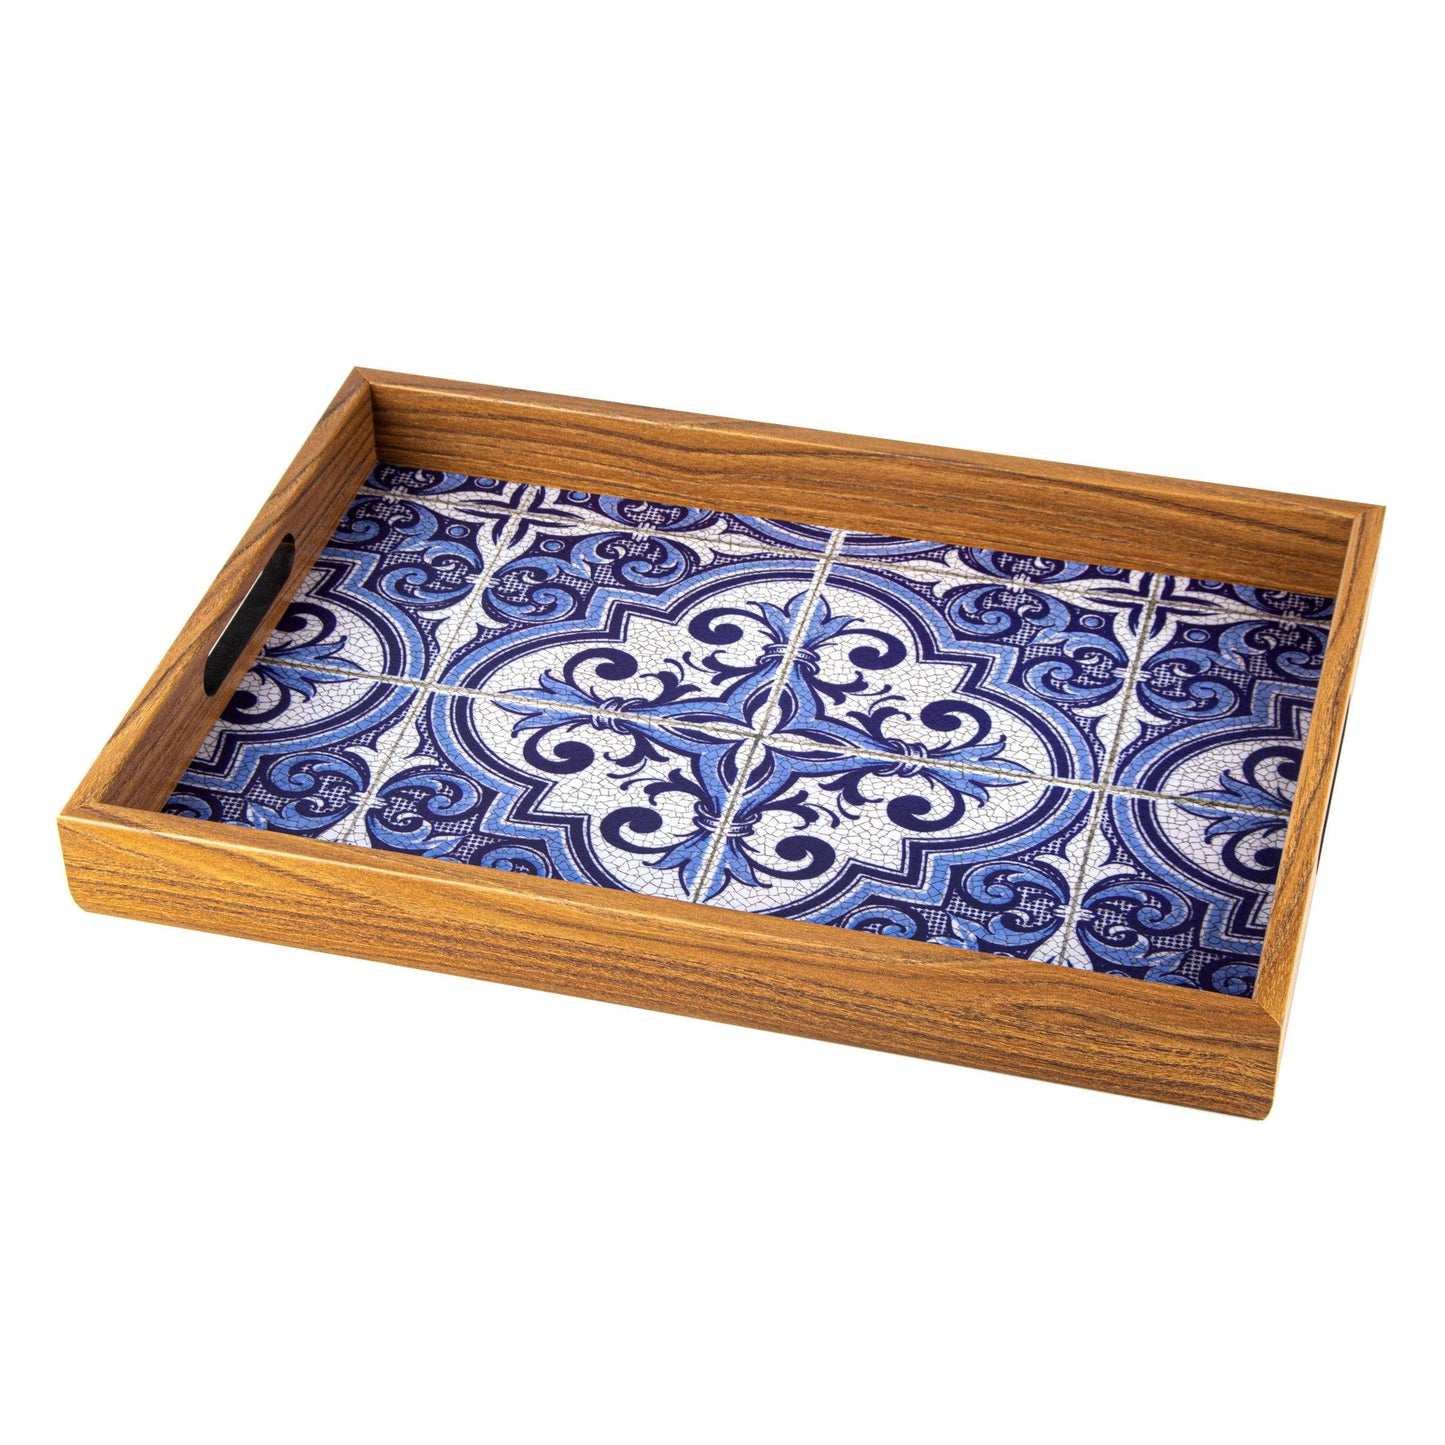 WOODEN TRAY with printed design - BLUE MOSAIC - LAZADO